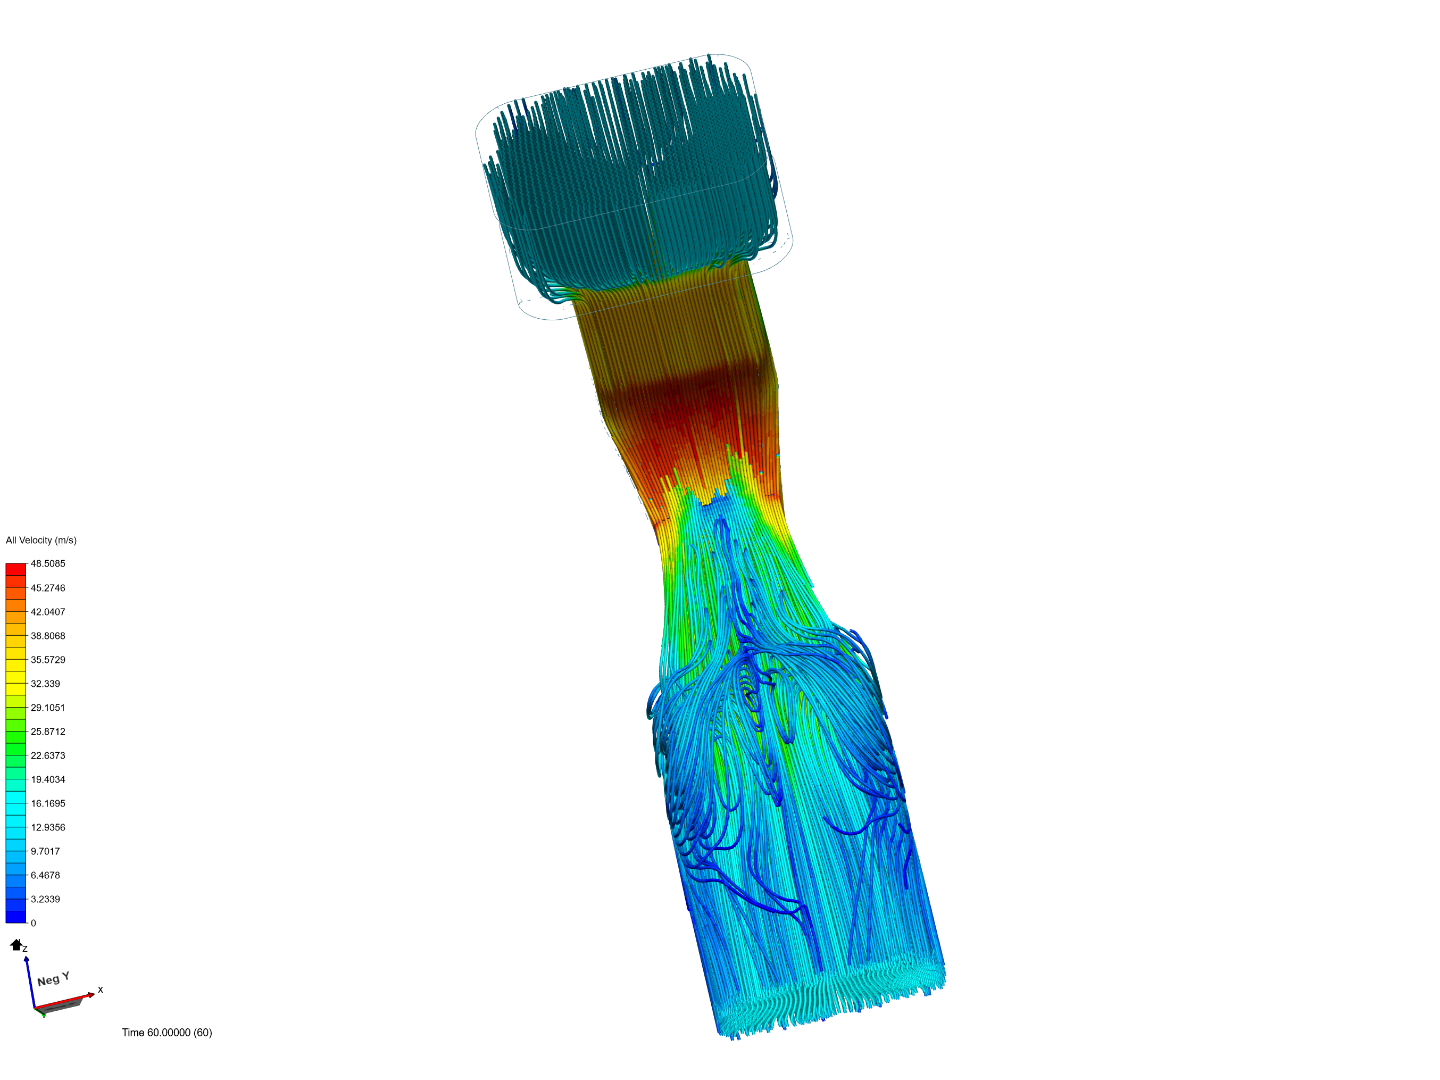 Duct_CFD_02 image